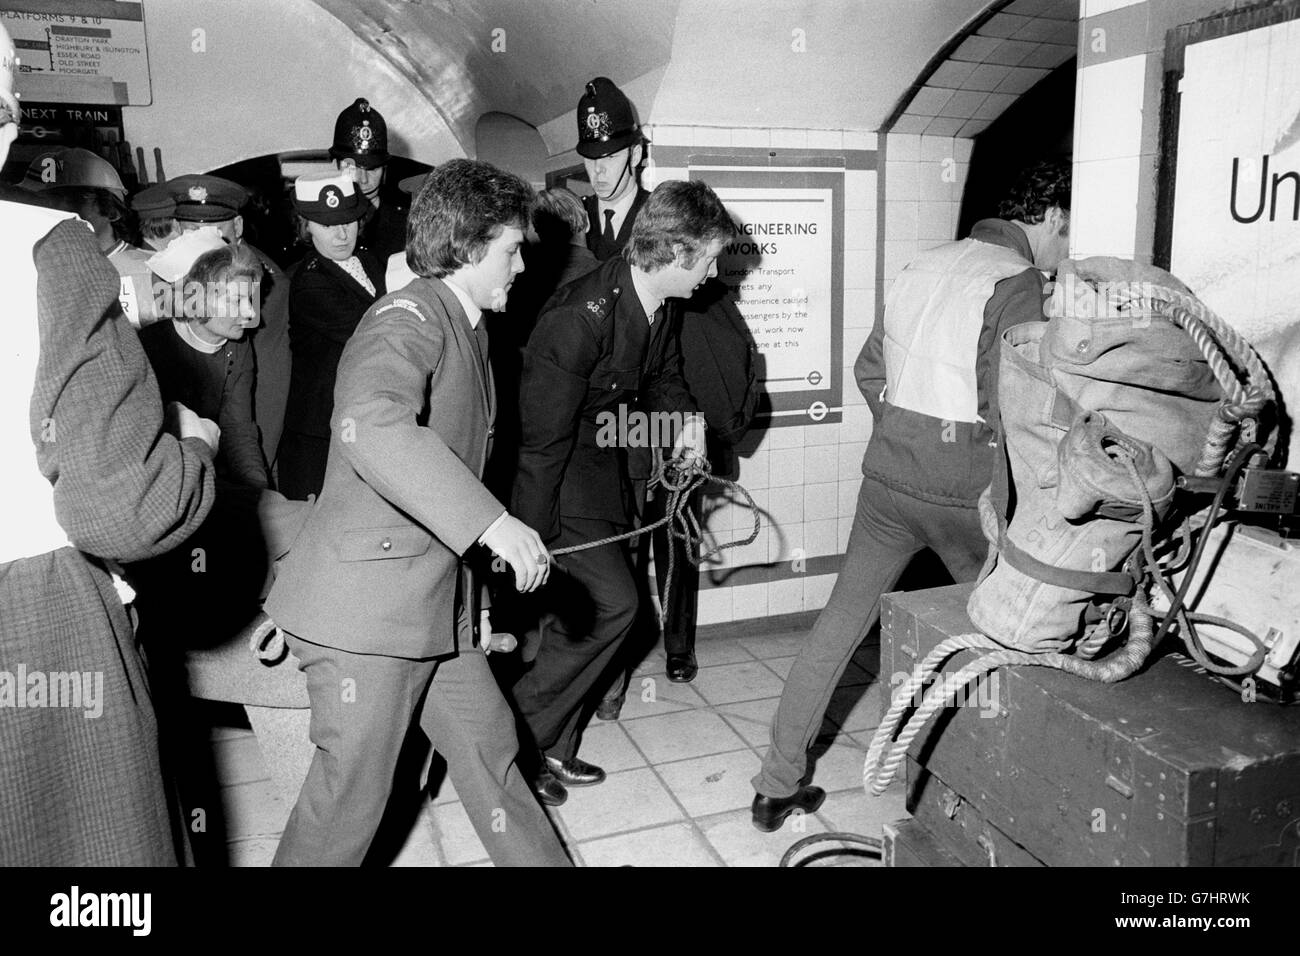 Disasters and Accidents - Moorgate Tube Crash - London - 1975 Stock Photo